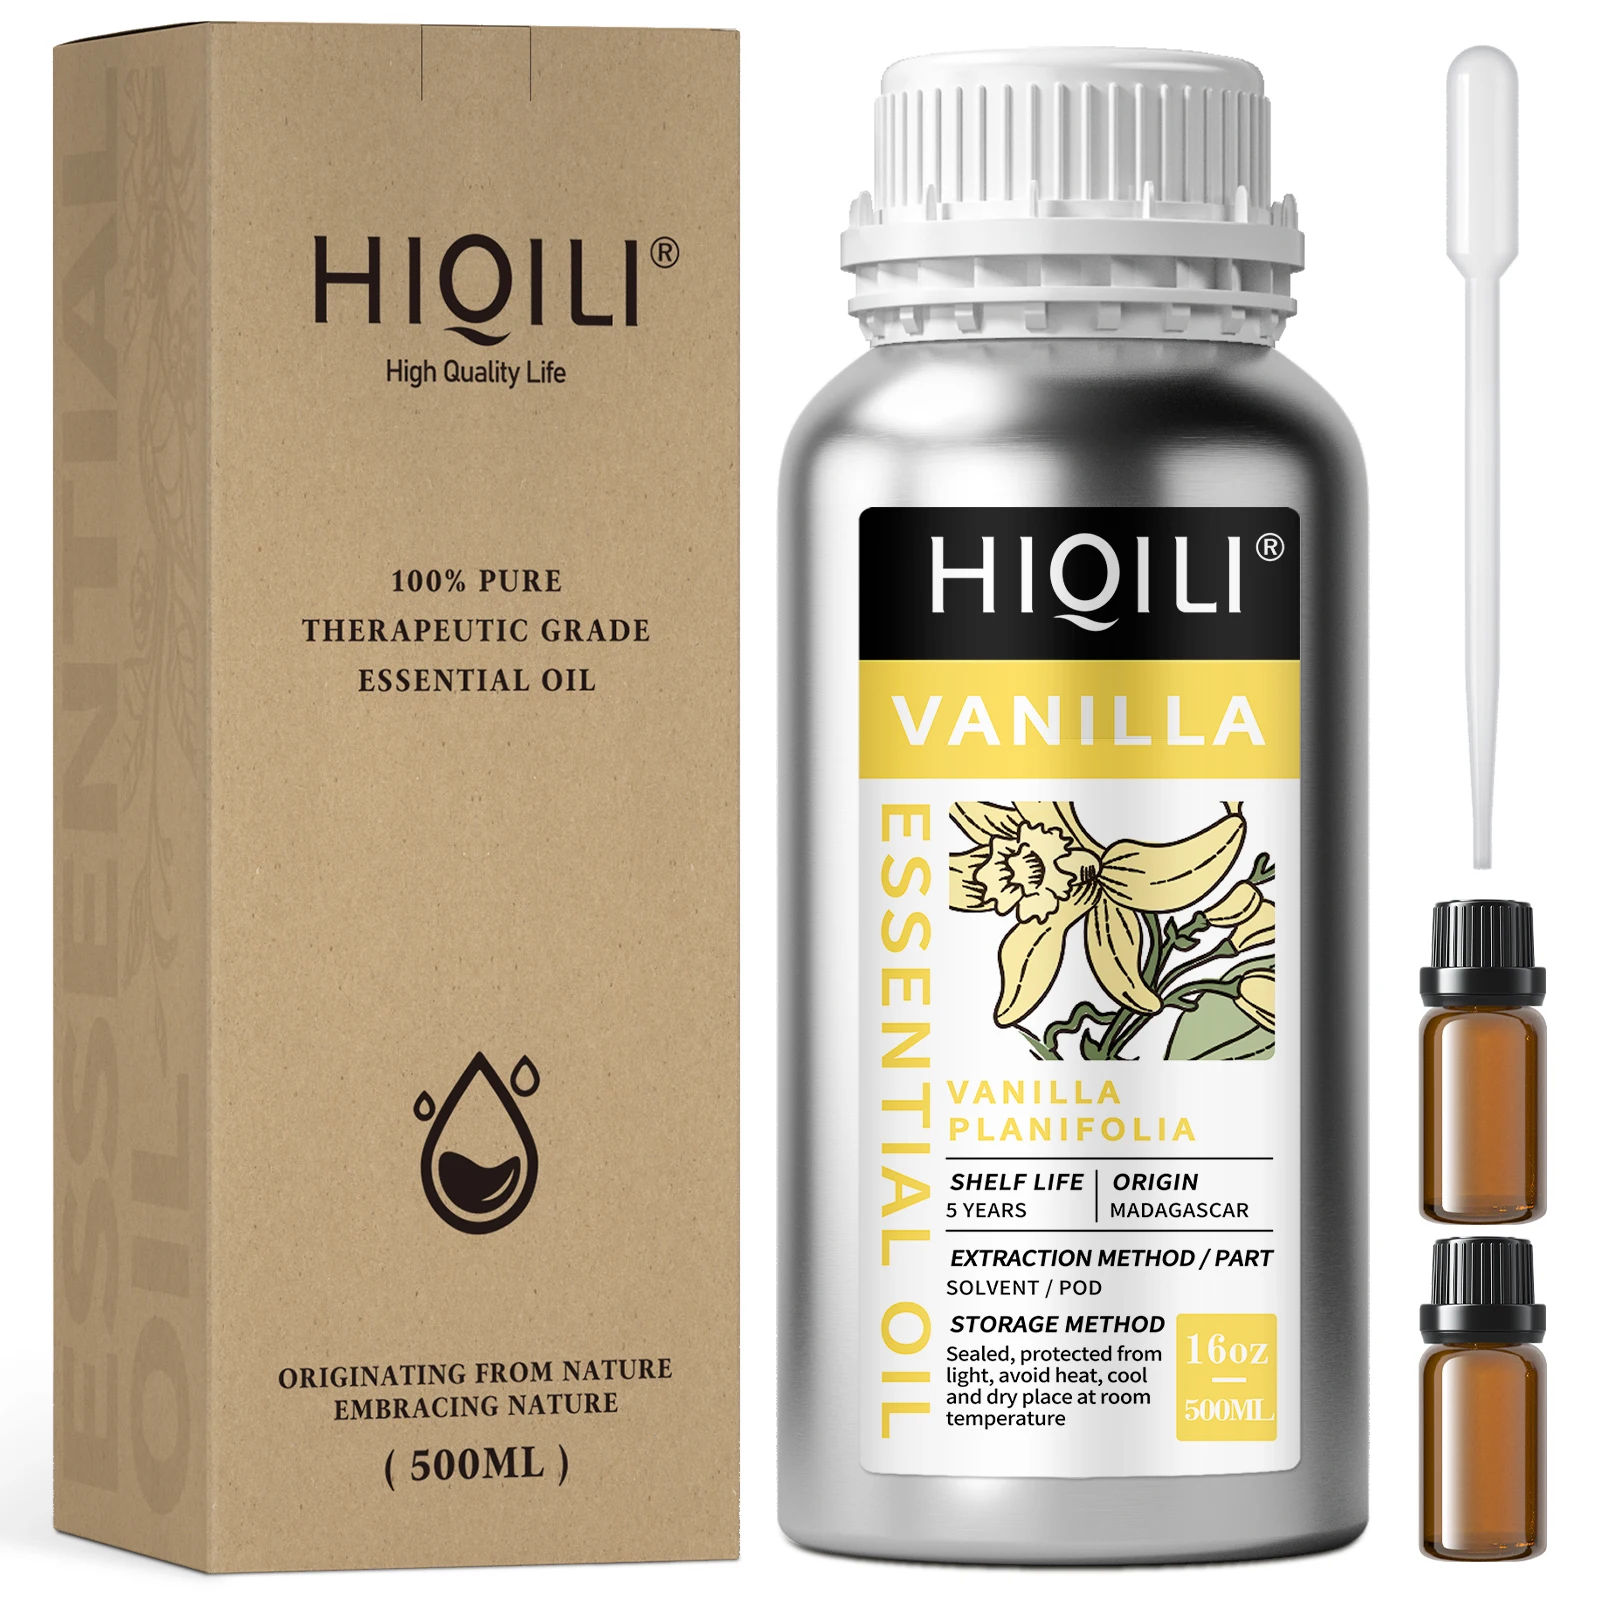 HIQILI 500ML Vanilla Essential Oils,100% Pure Nature for Aromatherapy | Used for Diffuser, Humidifier, Massage | Perfume DIY kinscoter electric aroma diffuser air humidifier 500ml ultrasonic cool mist maker fogger high quality led essential oil diffuser